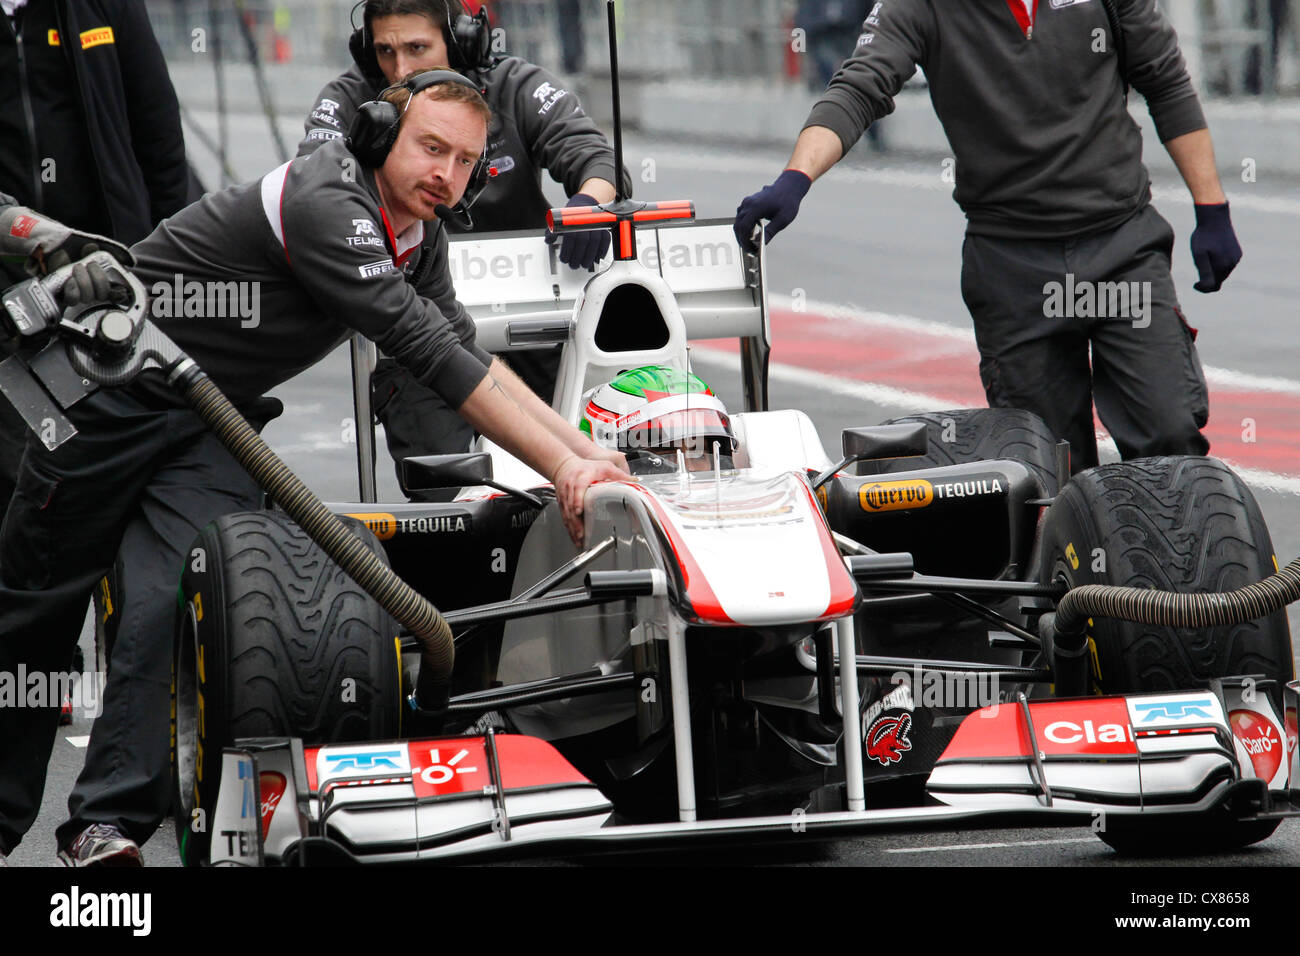 Sergio Perez being pushed by Sauber mechanics at pre-season testing in 2011 at Montmelo racing track in Barcelona, Spain Stock Photo